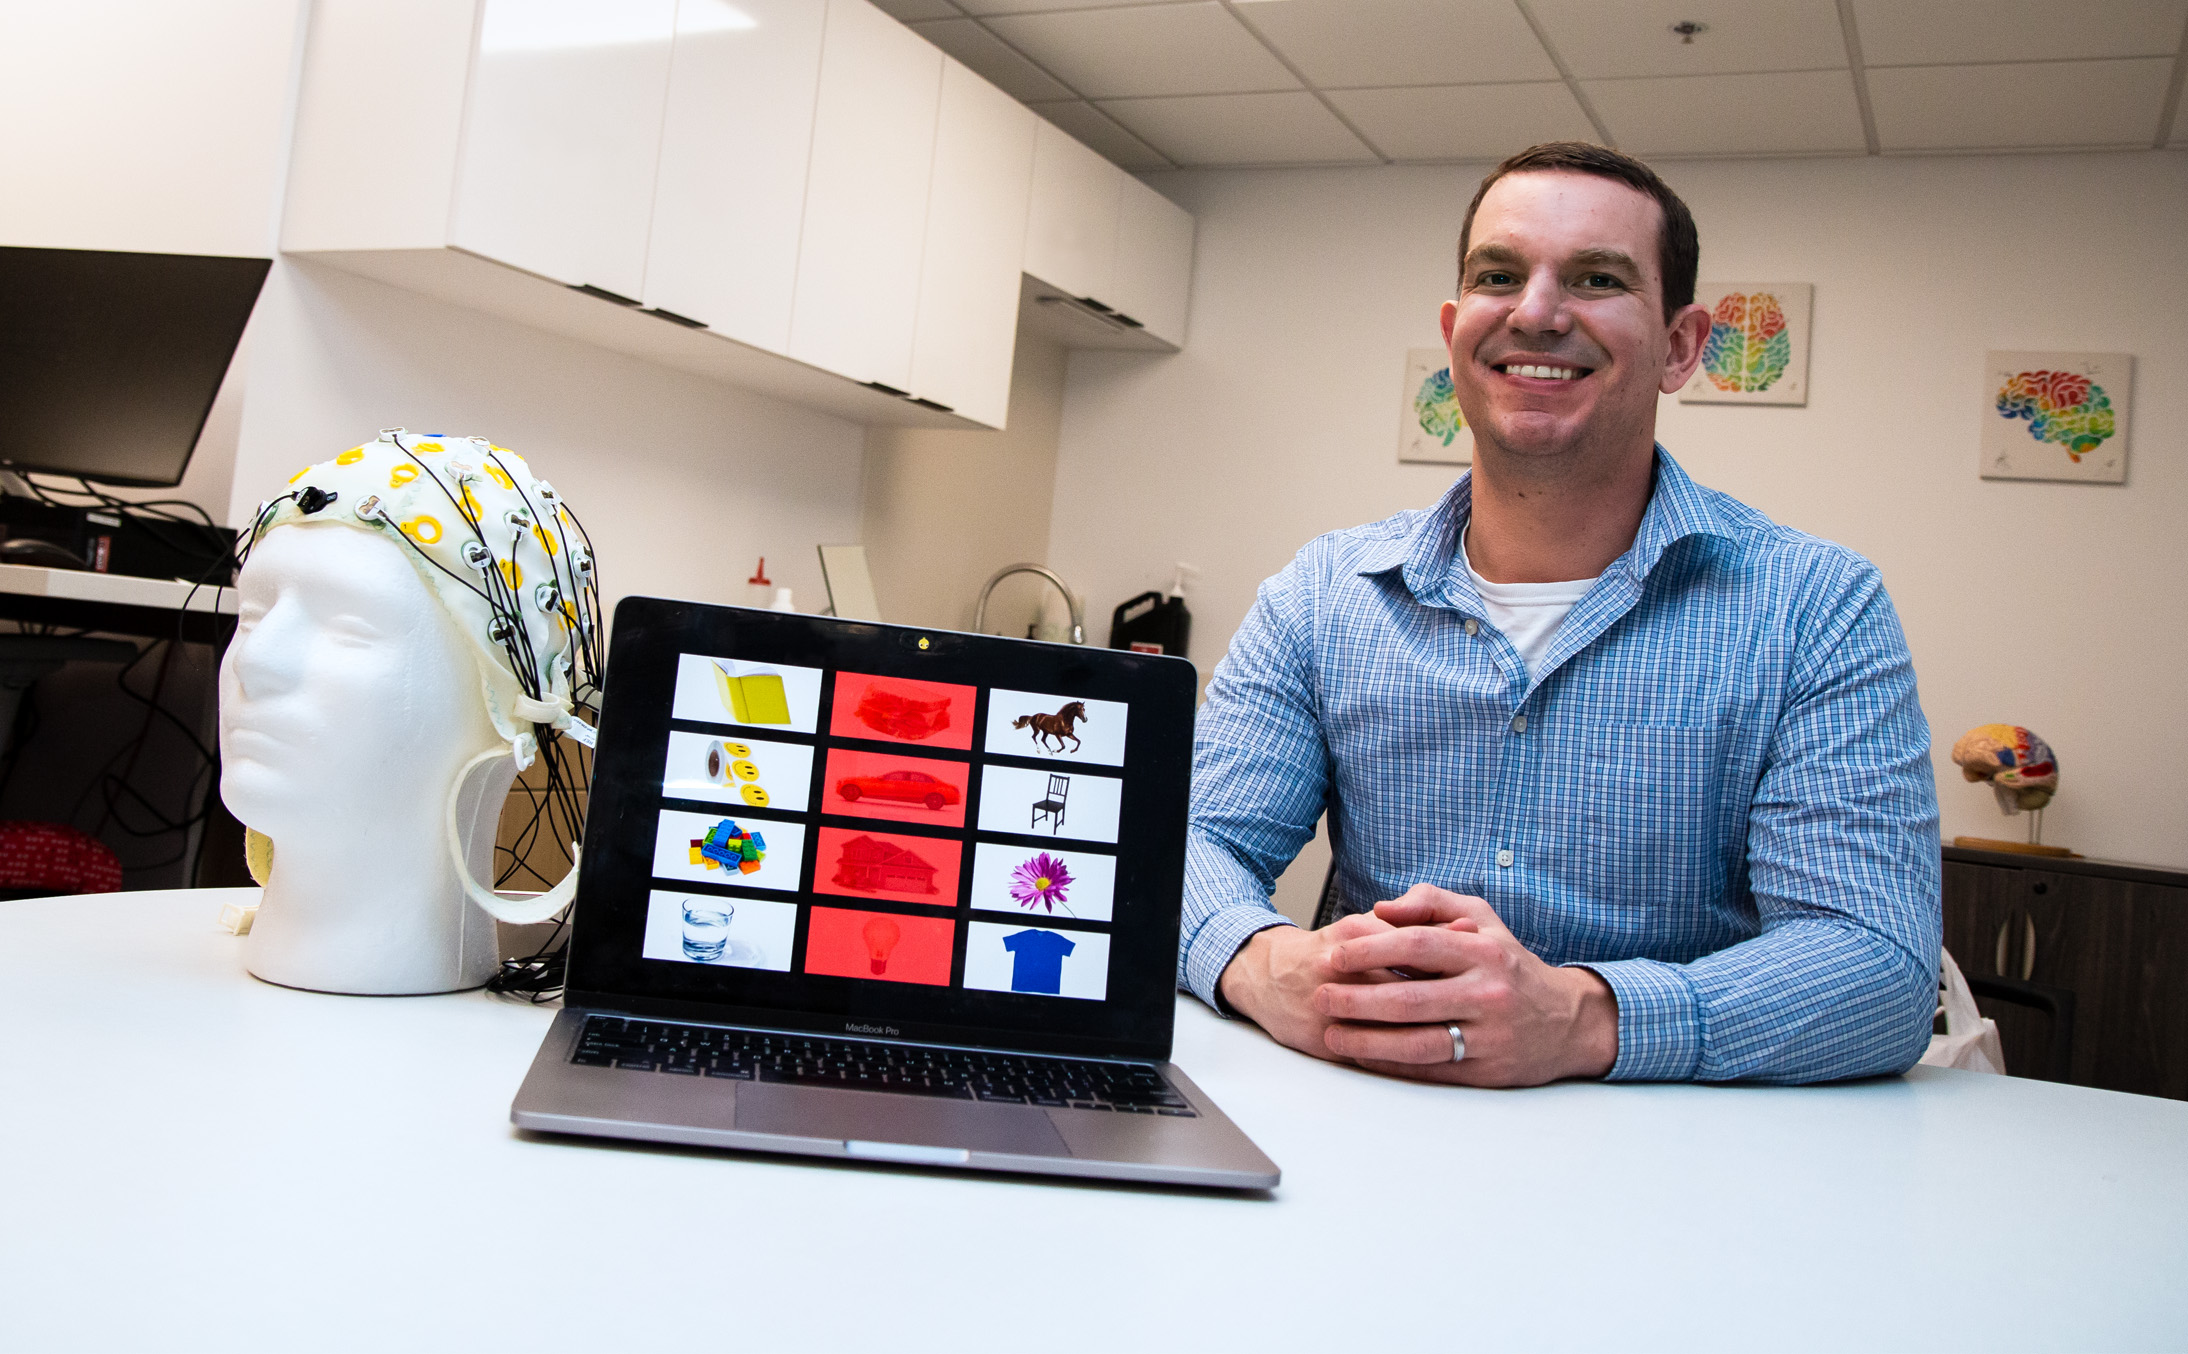 Kevin Pitt, assistant professor of special education and communication disorders, is leading a three-year project that uses brain-computer interface (BCI) technology to facilitate better communication for people with severe speech and physical impairments. (Kyleigh Skaggs, CYFS)